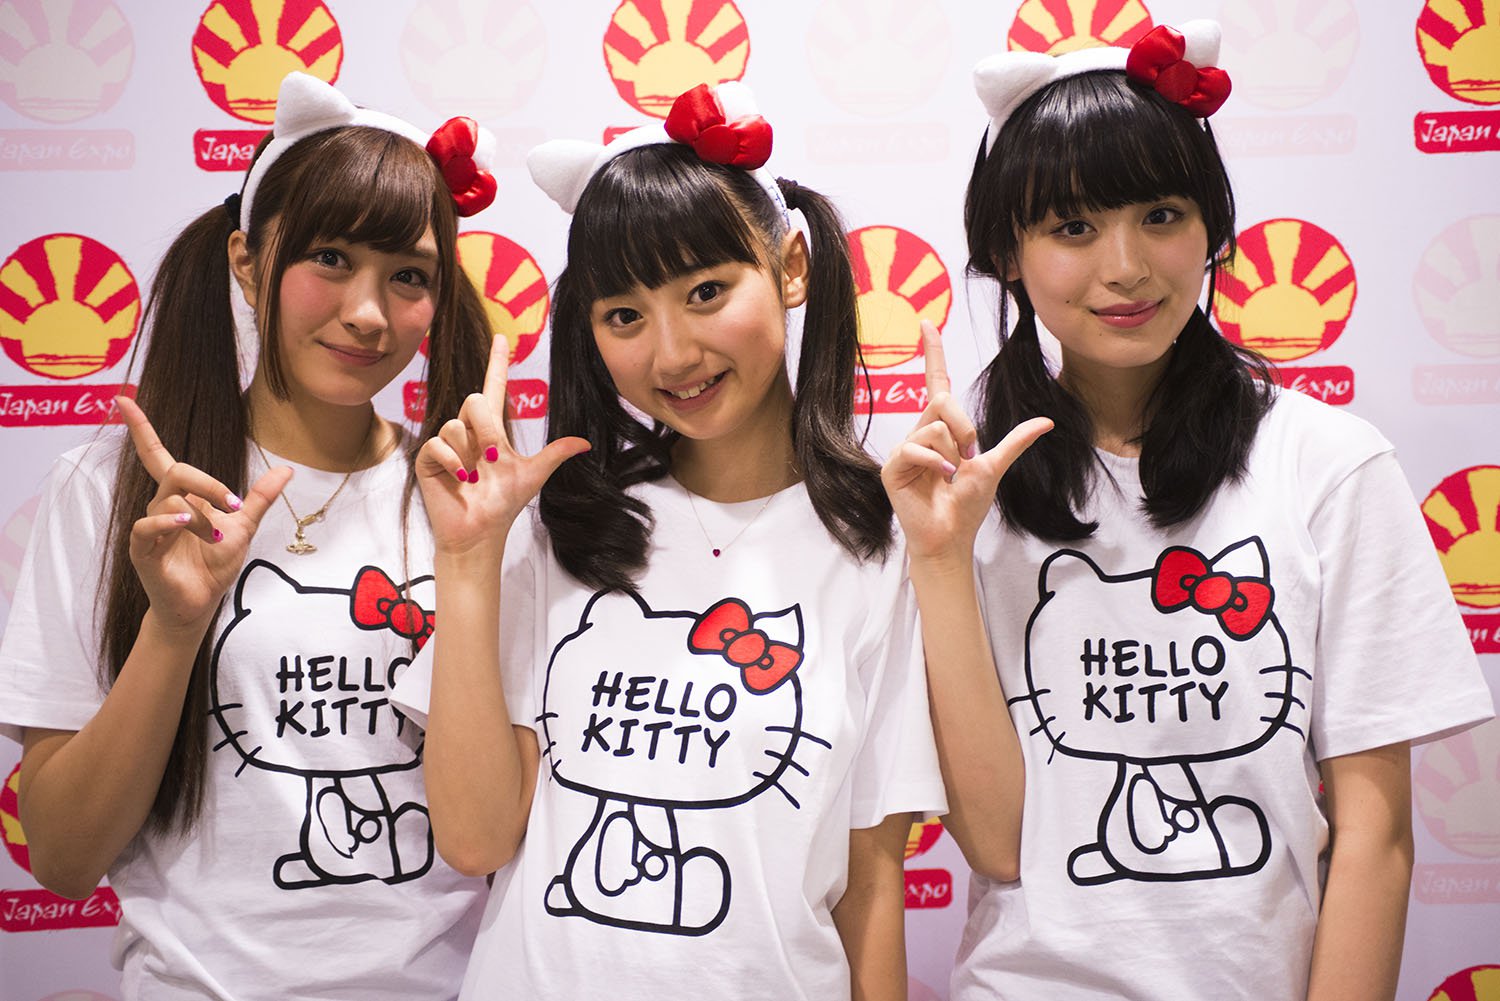 Interview Video of Girls Band Le Lien at Japan Expo 2015 in Paris!